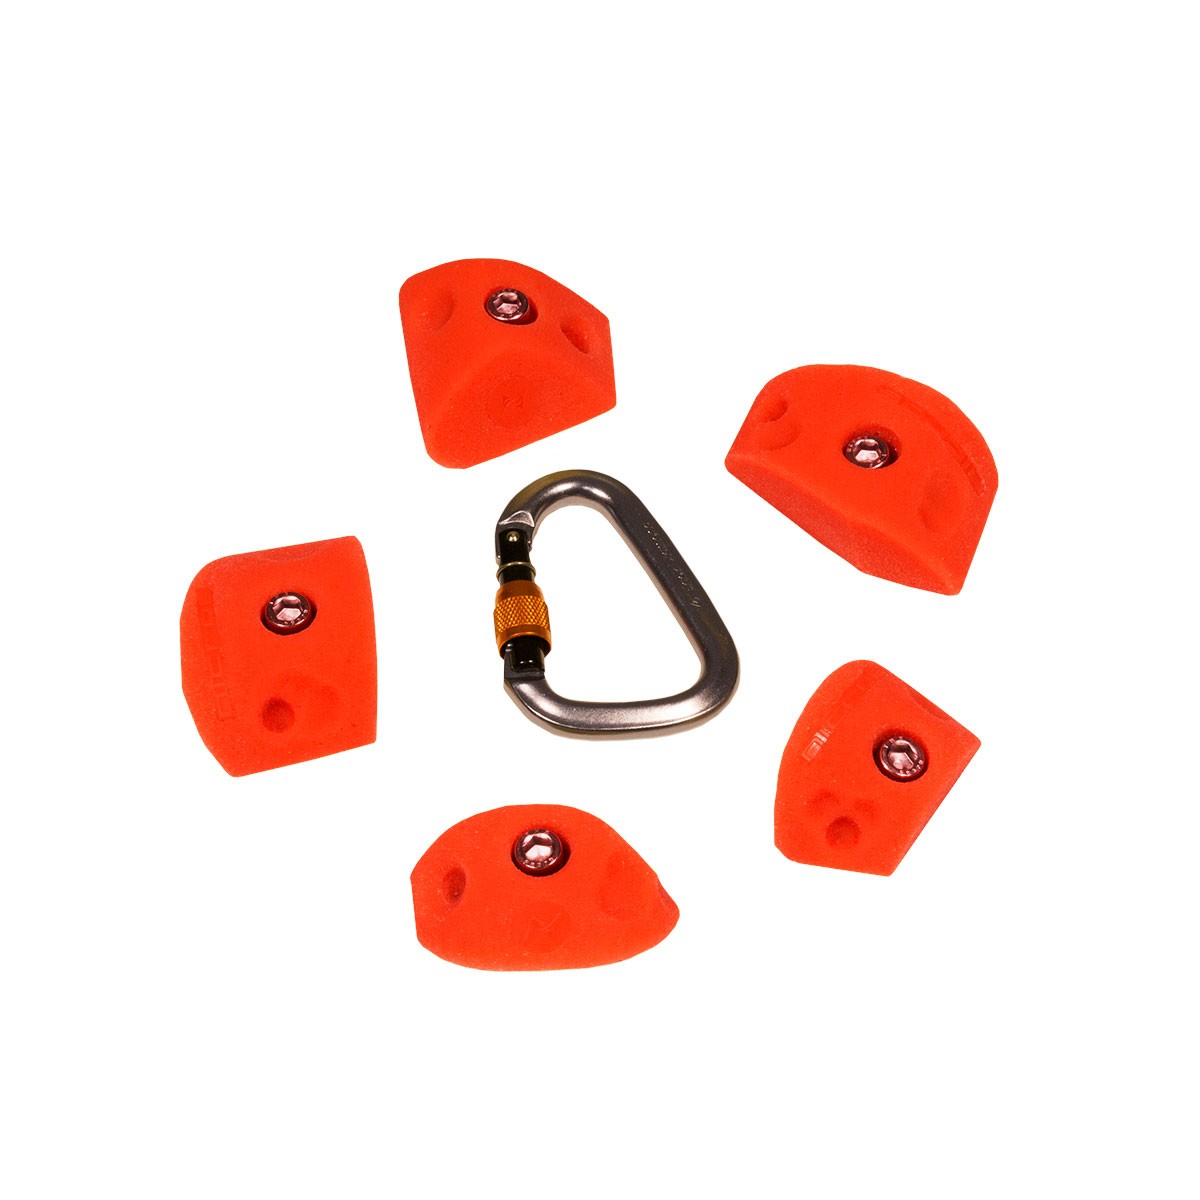 Picture of Nicros UNHAJH Feta Crumbles - 5 Piece Handholds 